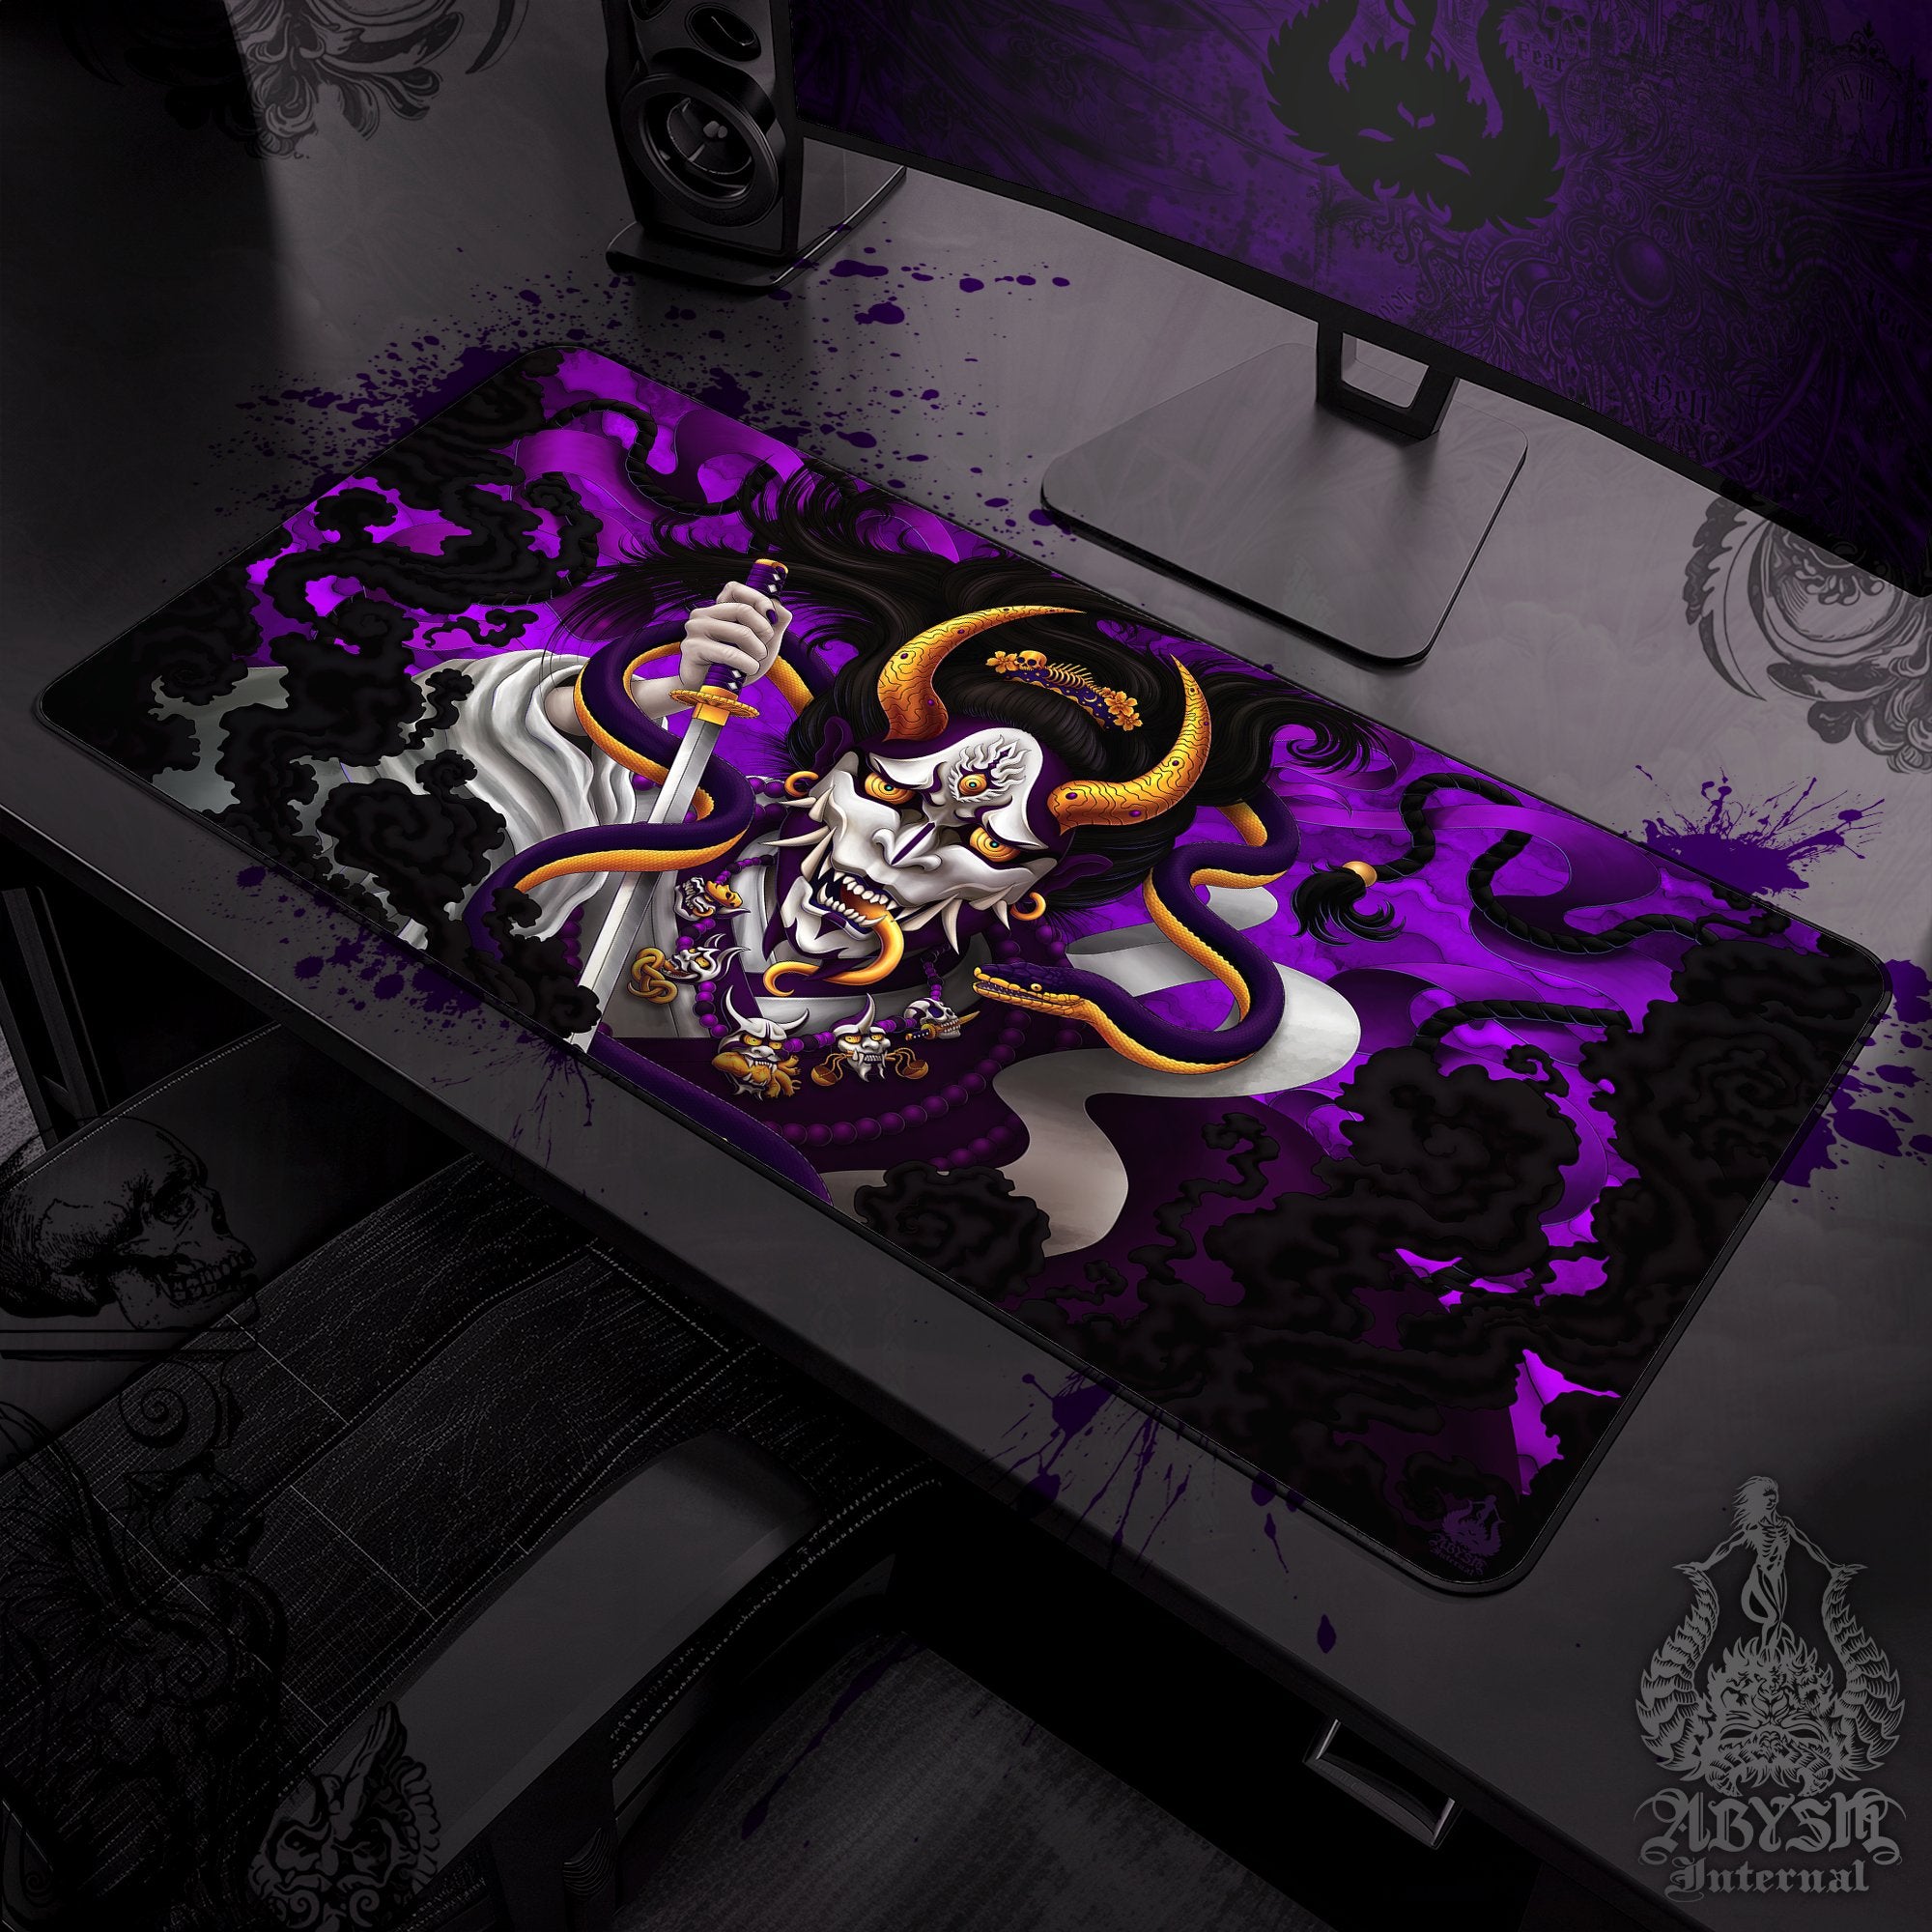 Japanese Demon Gaming Desk Mat, Hannya Mouse Pad, Youkai Table Protector Cover, White Goth Purple Workpad, Fantasy Anime and Manga Art Print - Snake - Abysm Internal